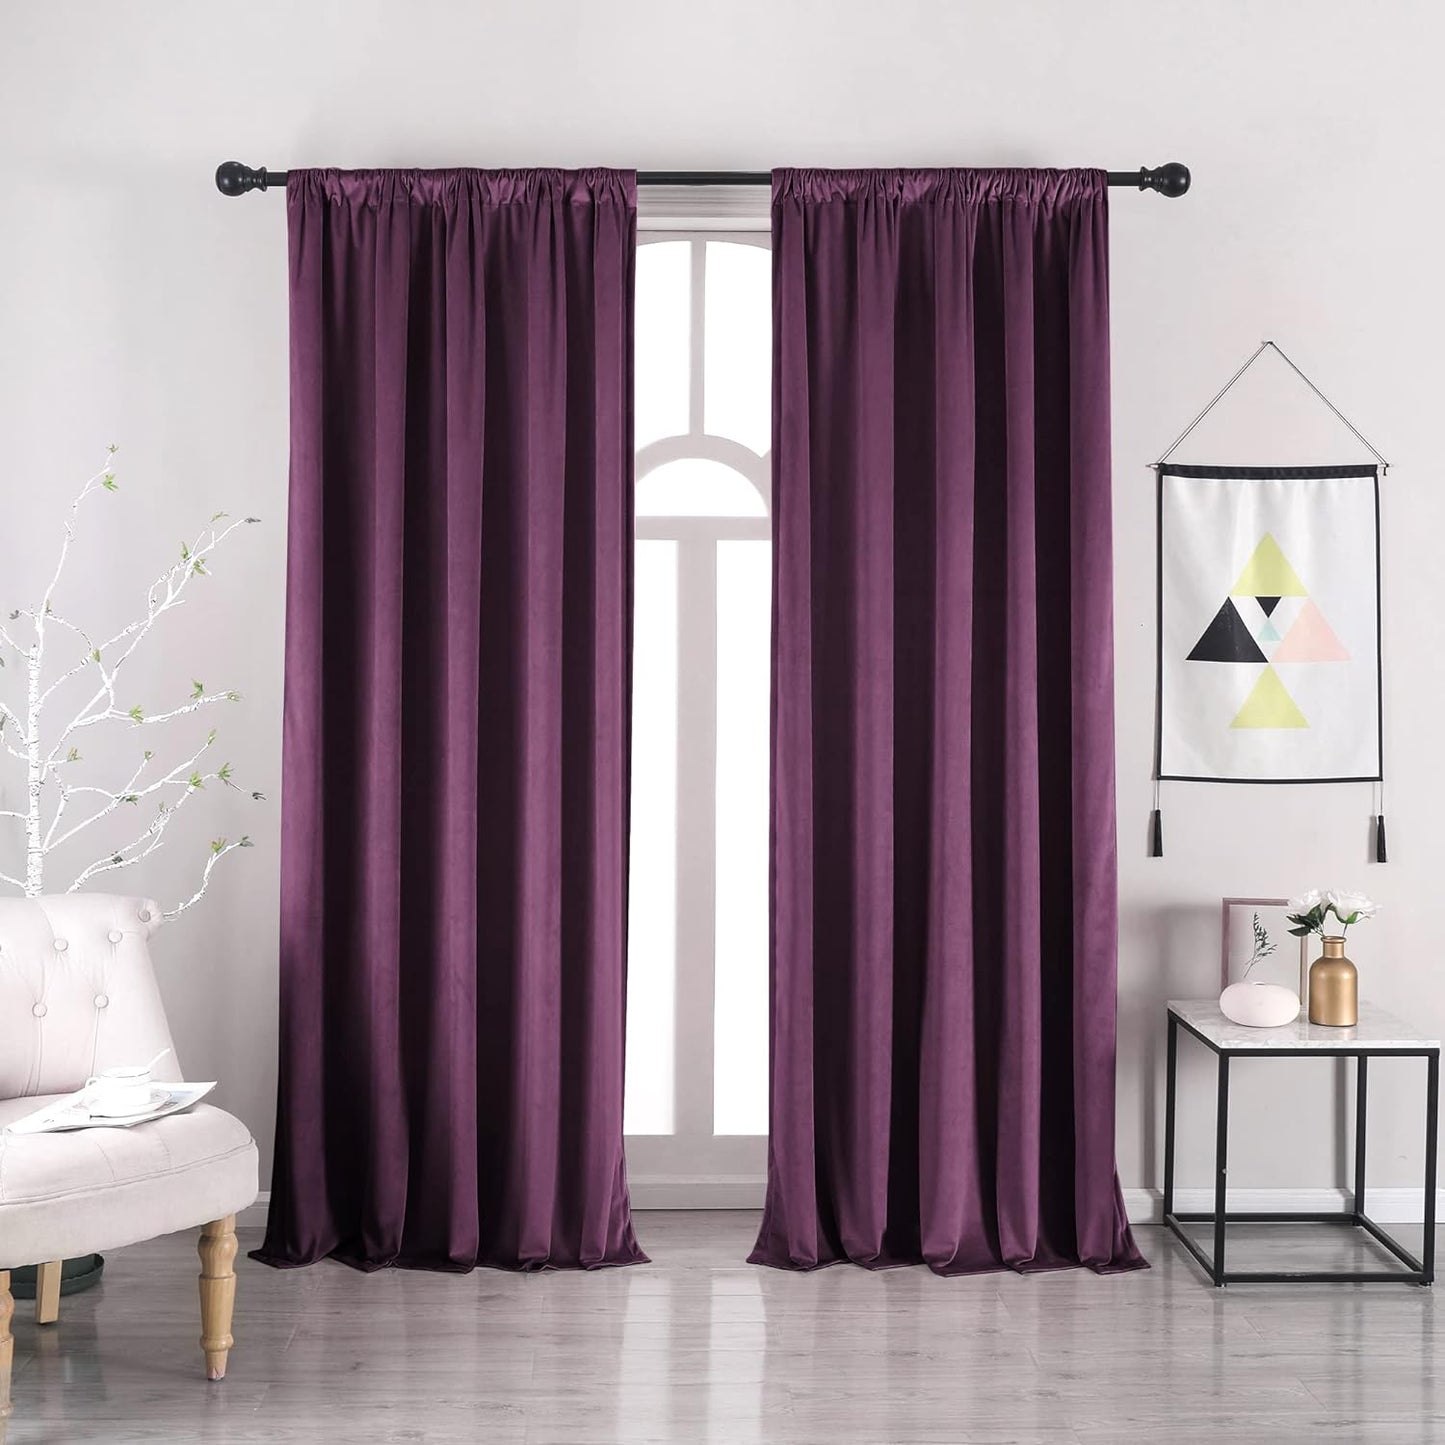 Nanbowang Green Velvet Curtains 63 Inches Long Dark Green Light Blocking Rod Pocket Window Curtain Panels Set of 2 Heat Insulated Curtains Thermal Curtain Panels for Bedroom  nanbowang Purple 52"X72" 